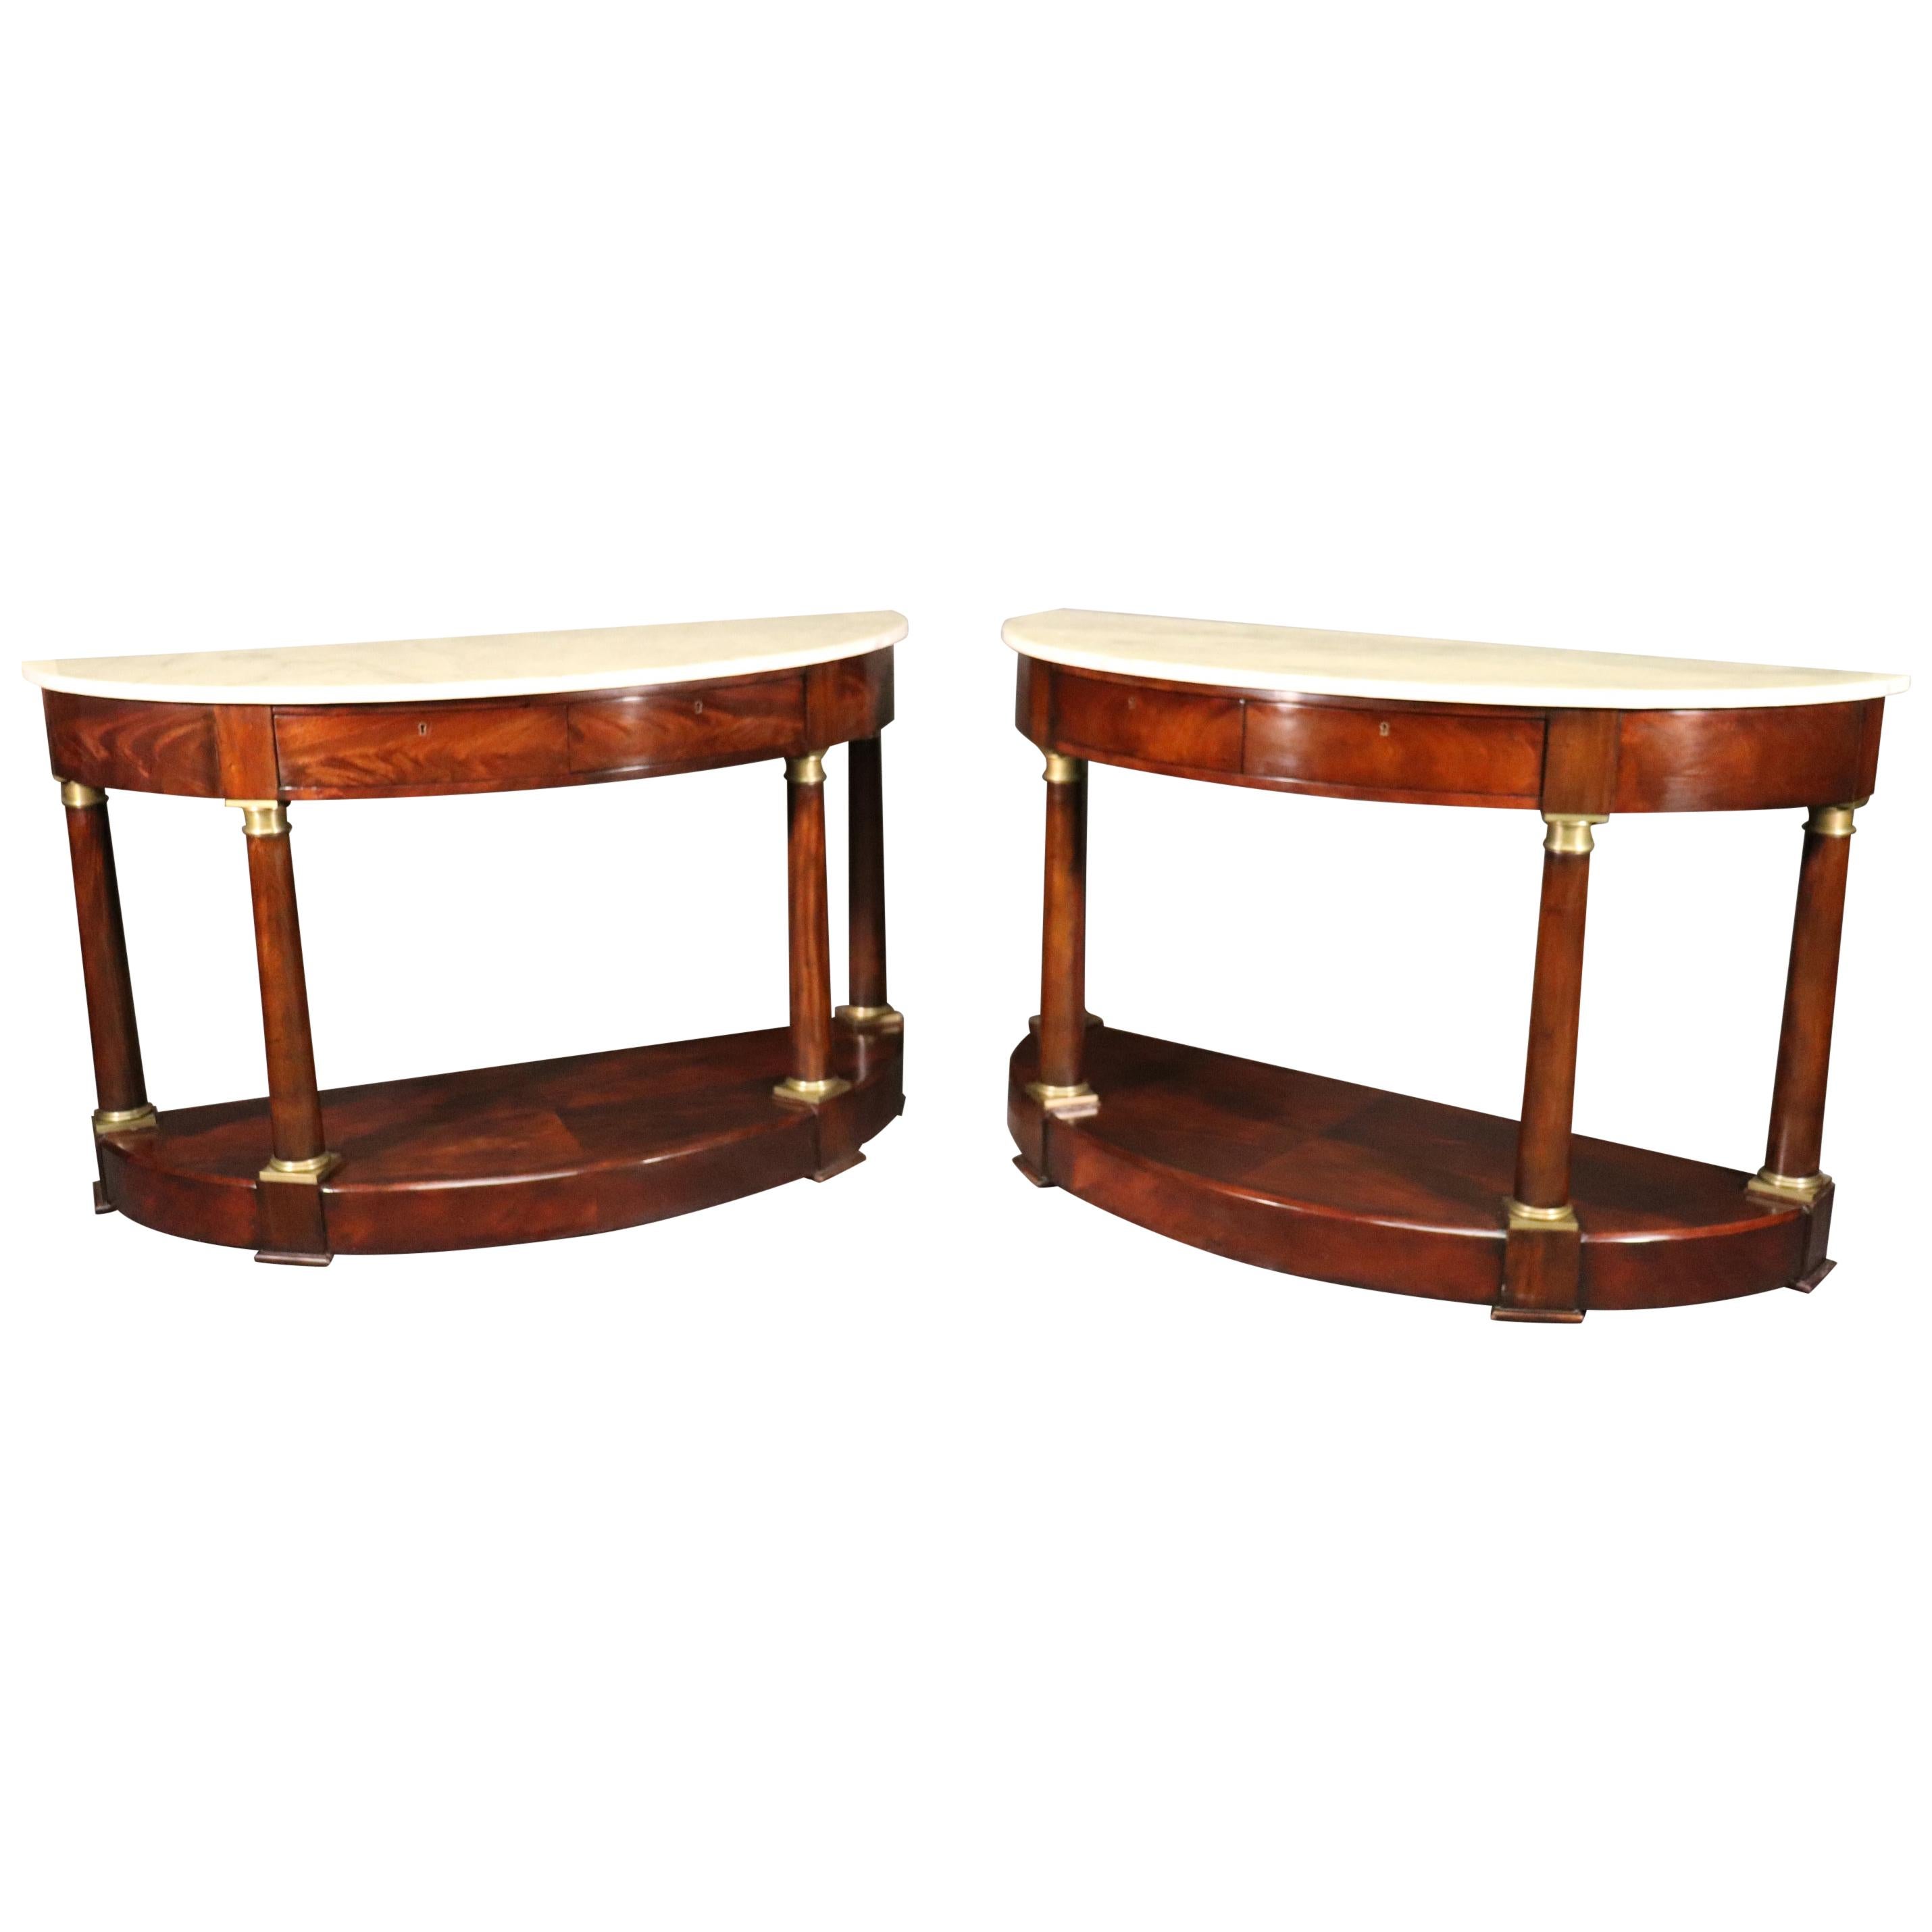 Pair of Lillian August Faux marble Painted Empire Style Demilune Console Tables